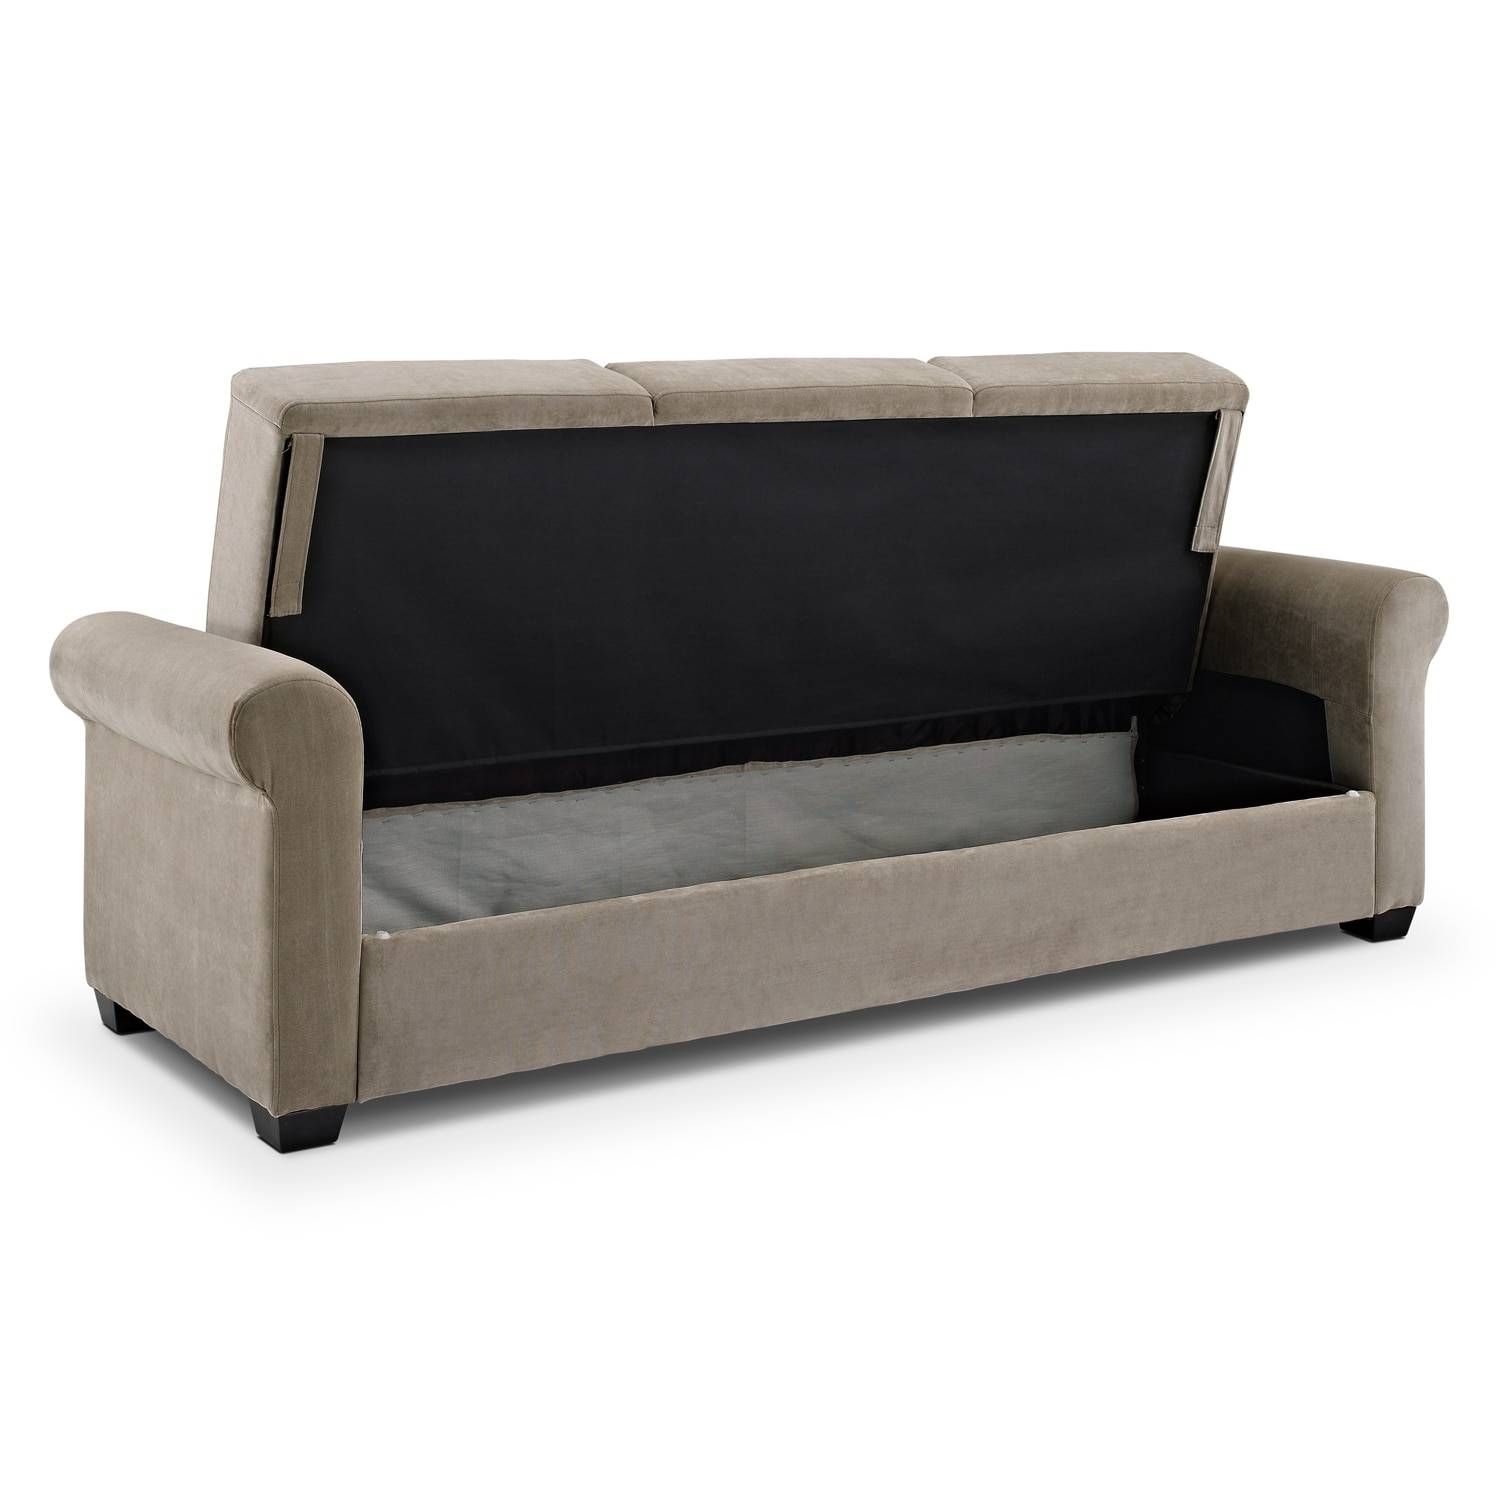 Thomas Futon Sofa Bed With Storage – Light Brown | Value City Within Storage Sofa Beds (View 19 of 30)